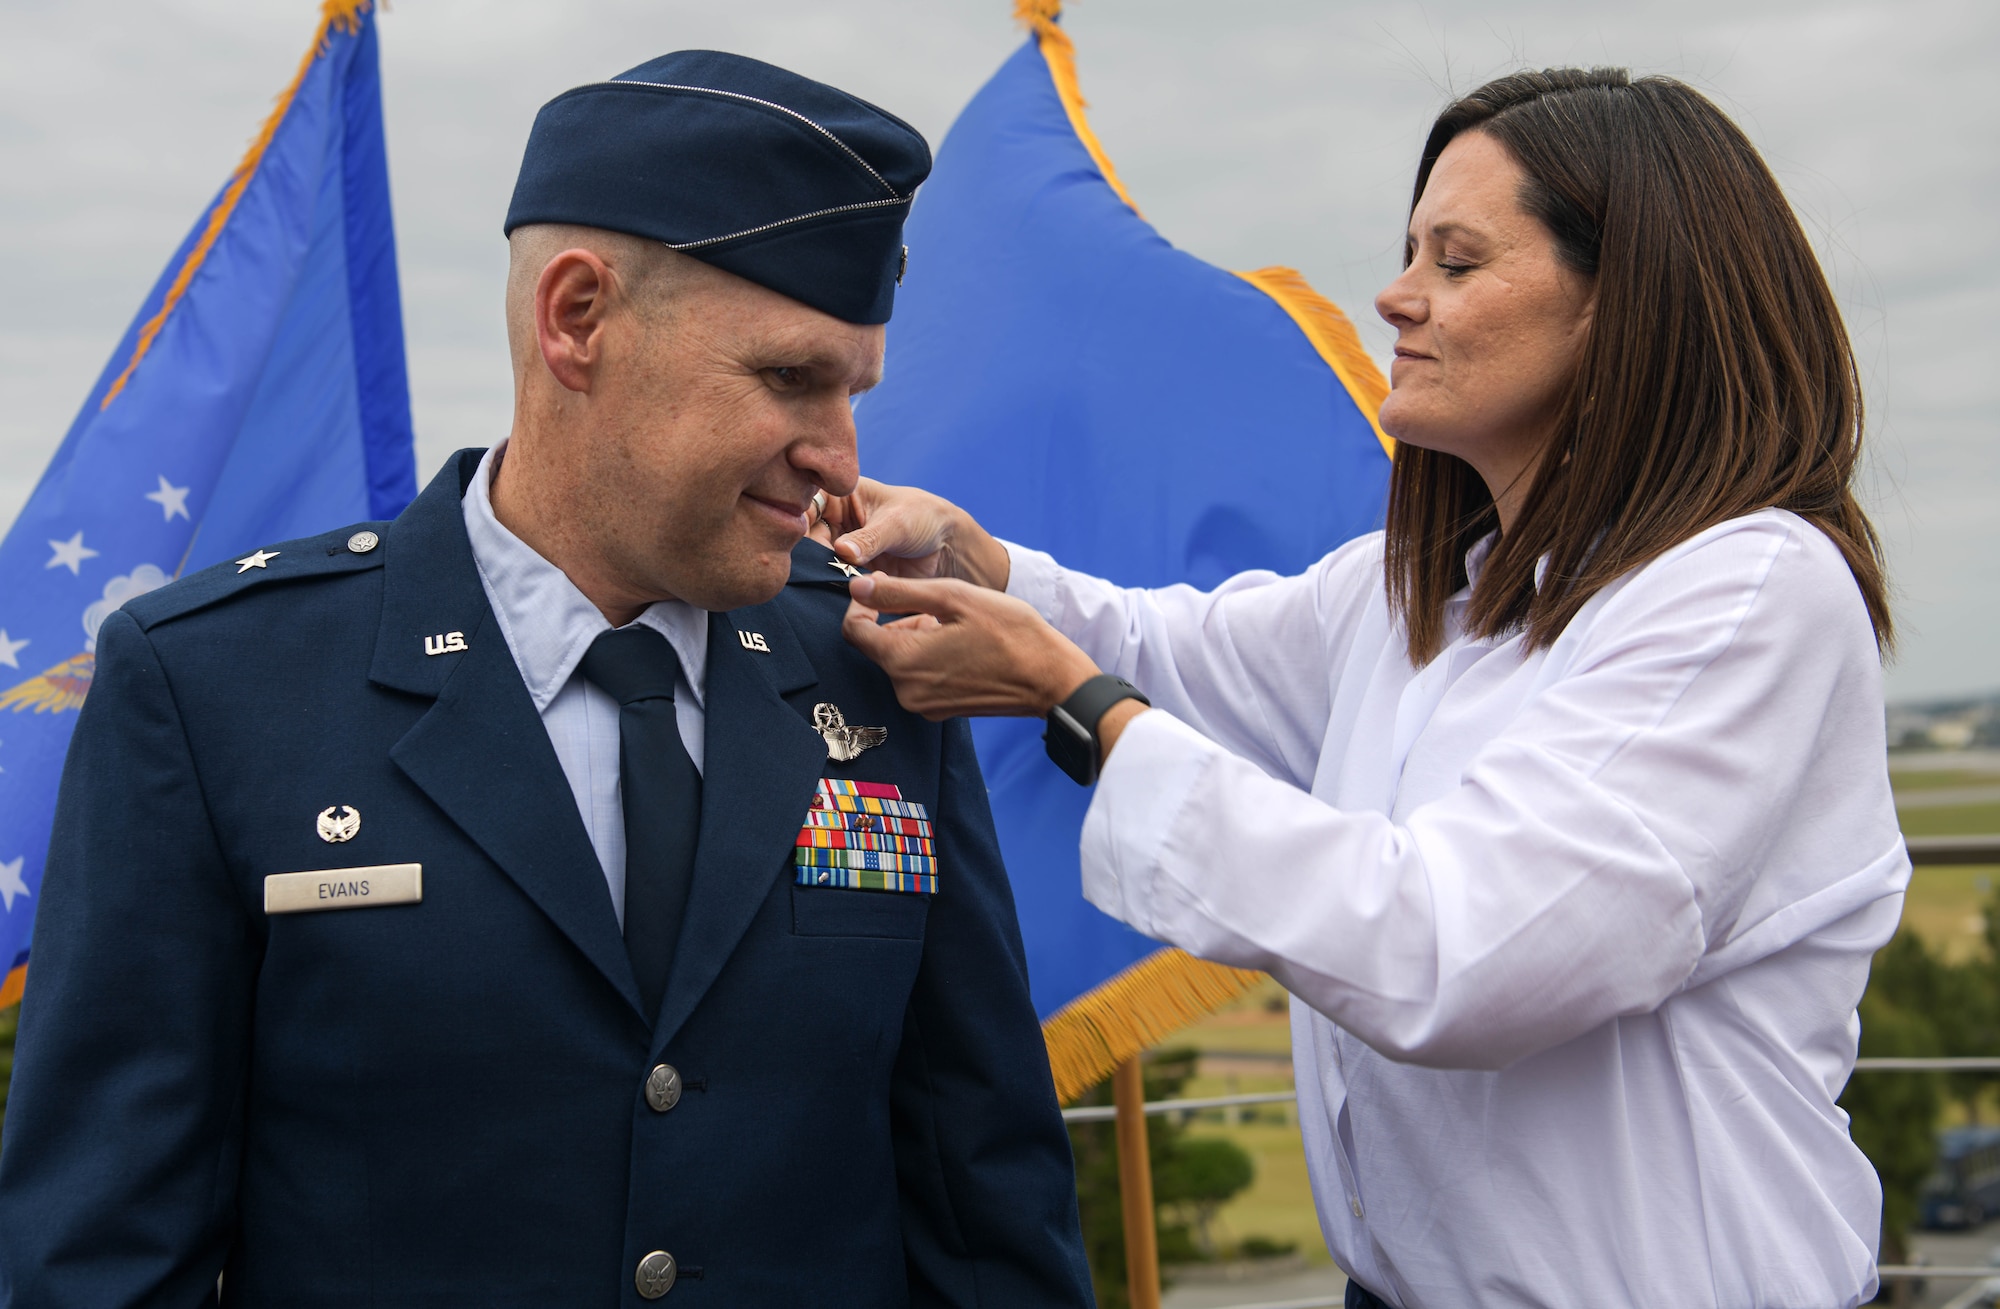 Shelley Evans pins on the rank of her husband, Brig. Gen. Nicholas Evans, during a promotion ceremony.